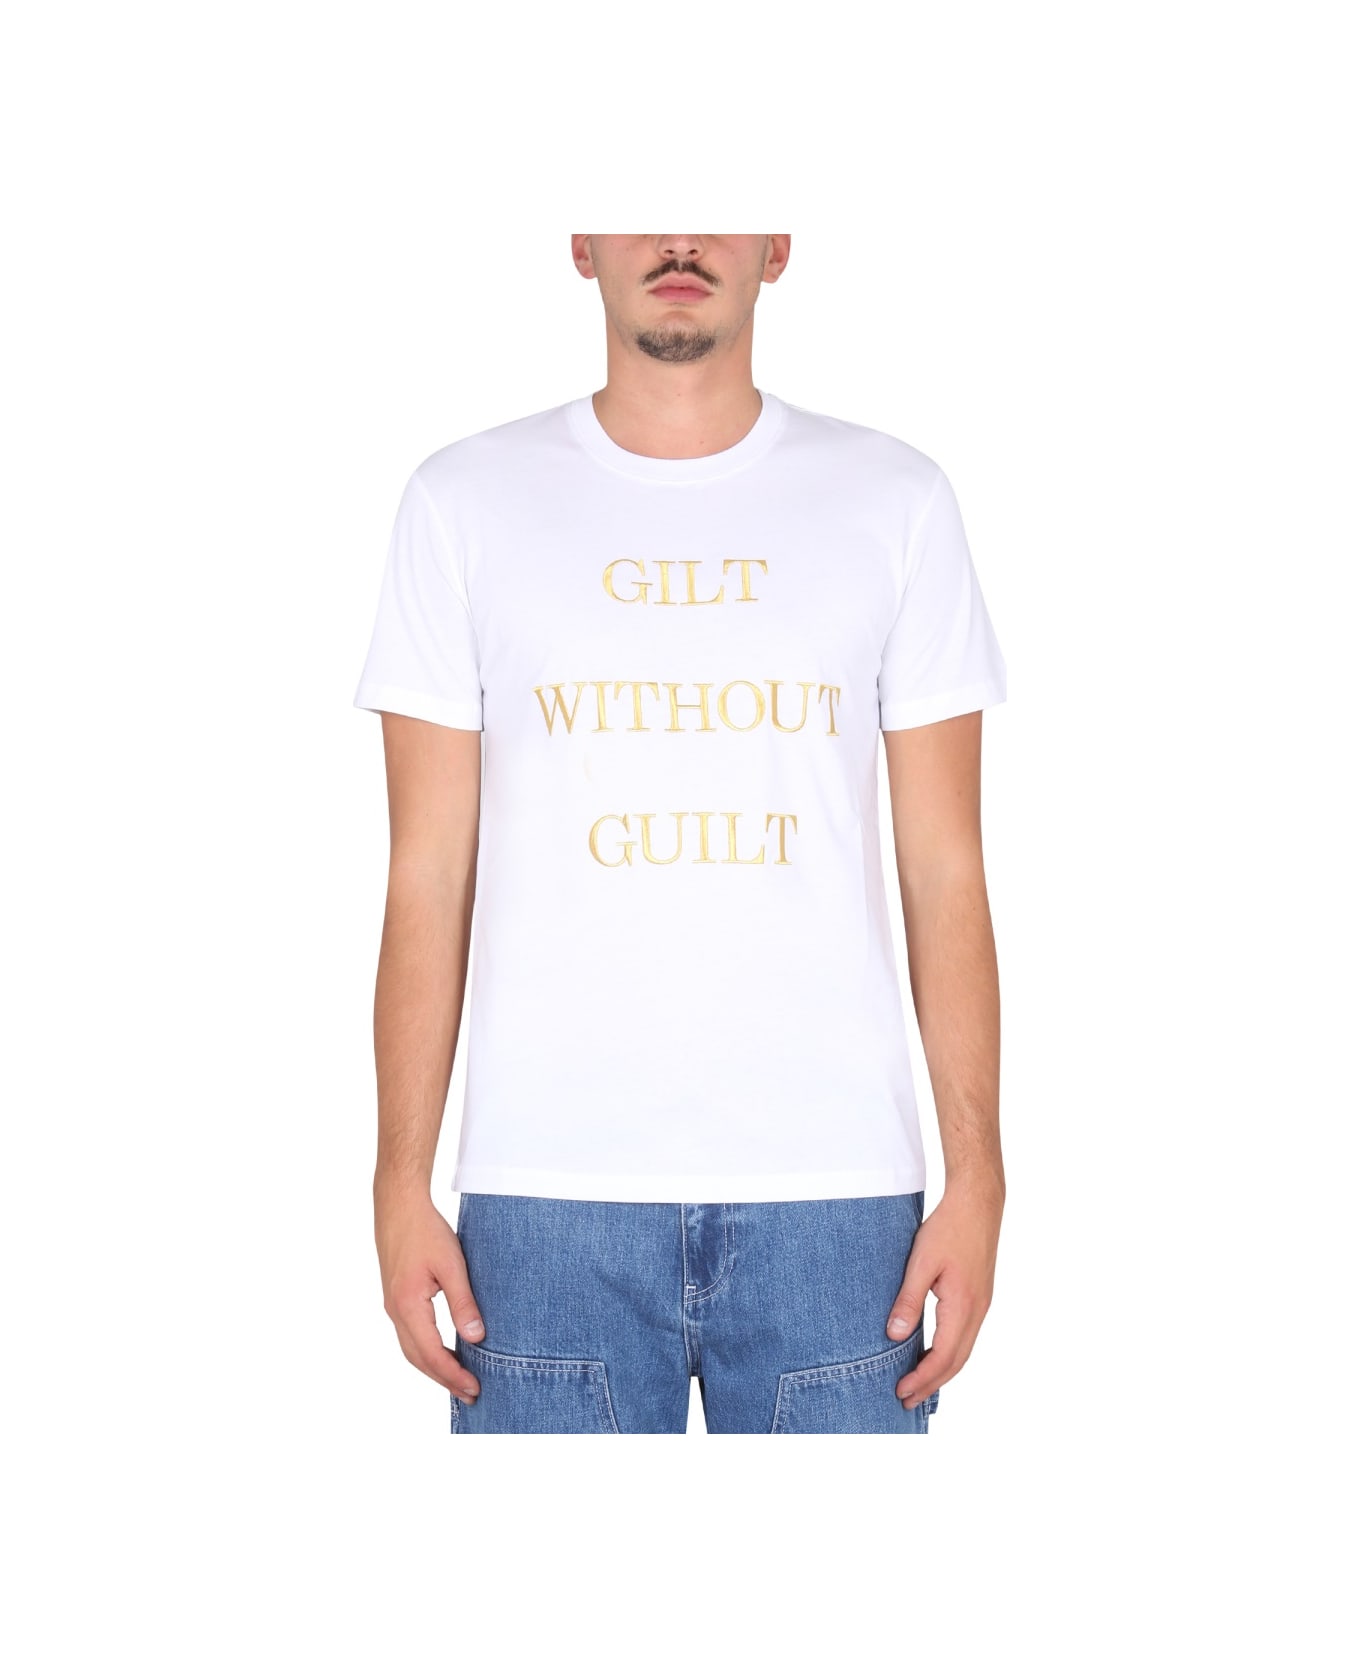 Moschino "guilt Without Guilt" T-shirt - WHITE